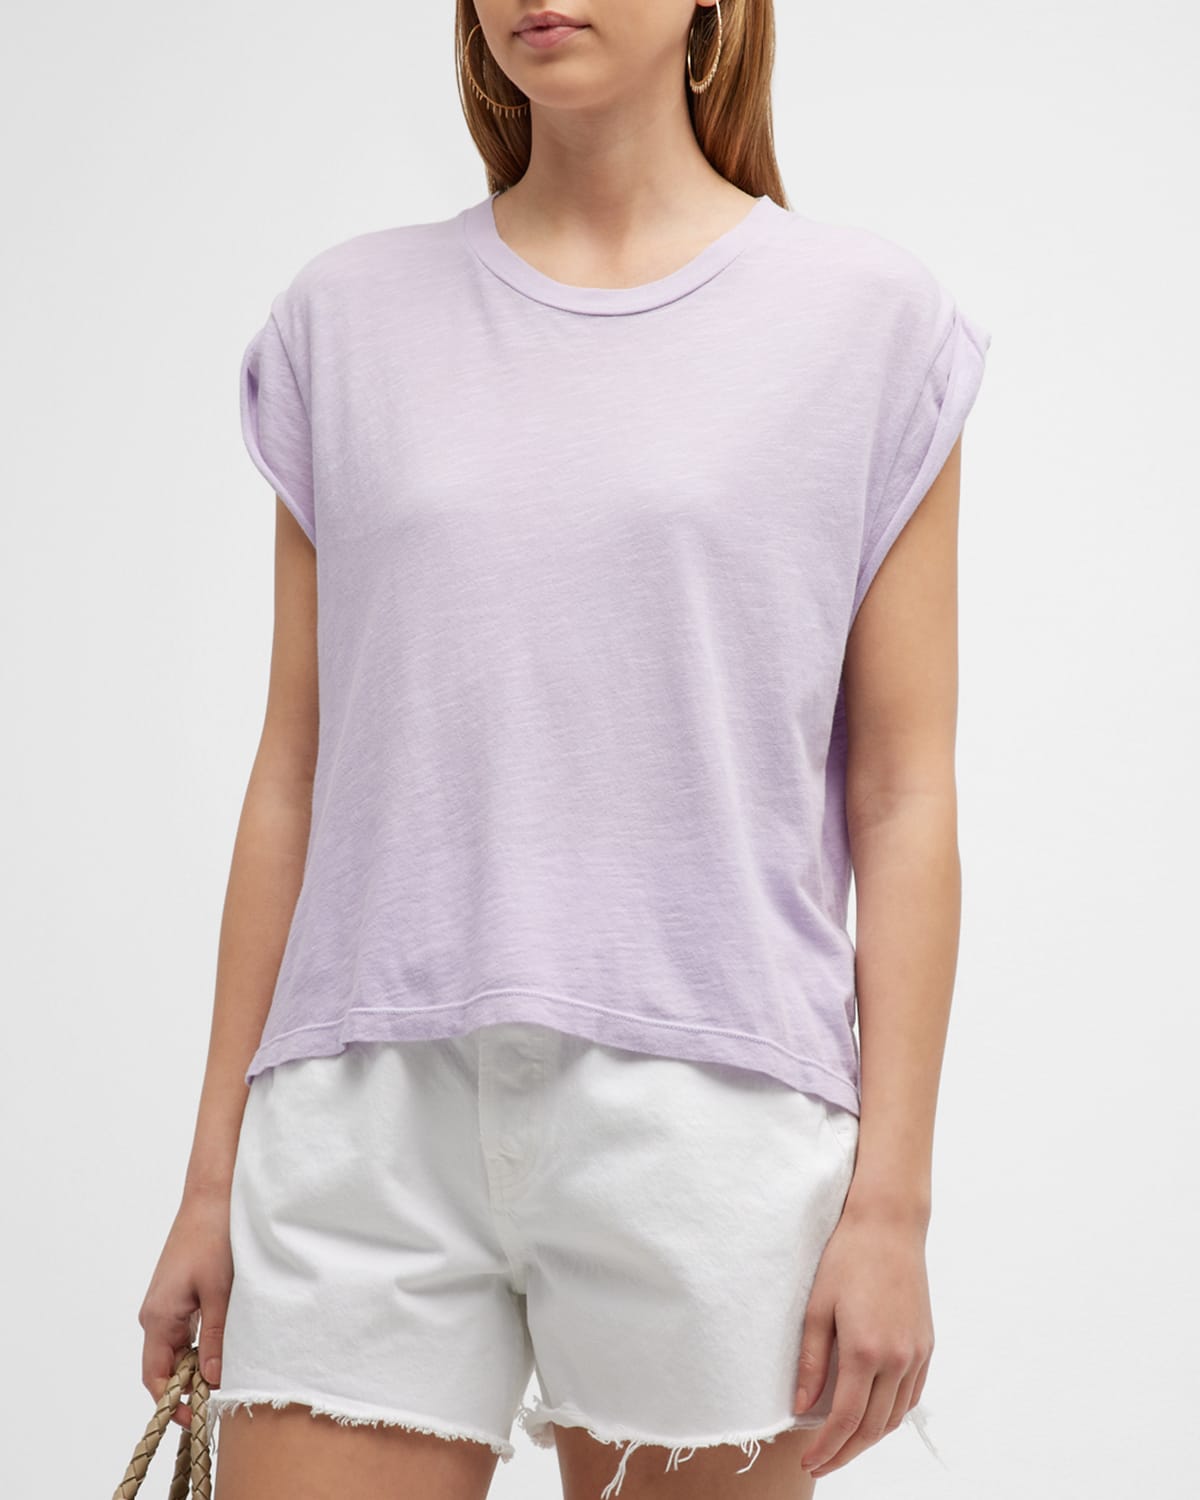 CITIZENS OF HUMANITY KELSEY ROLLED SLEEVE TEE